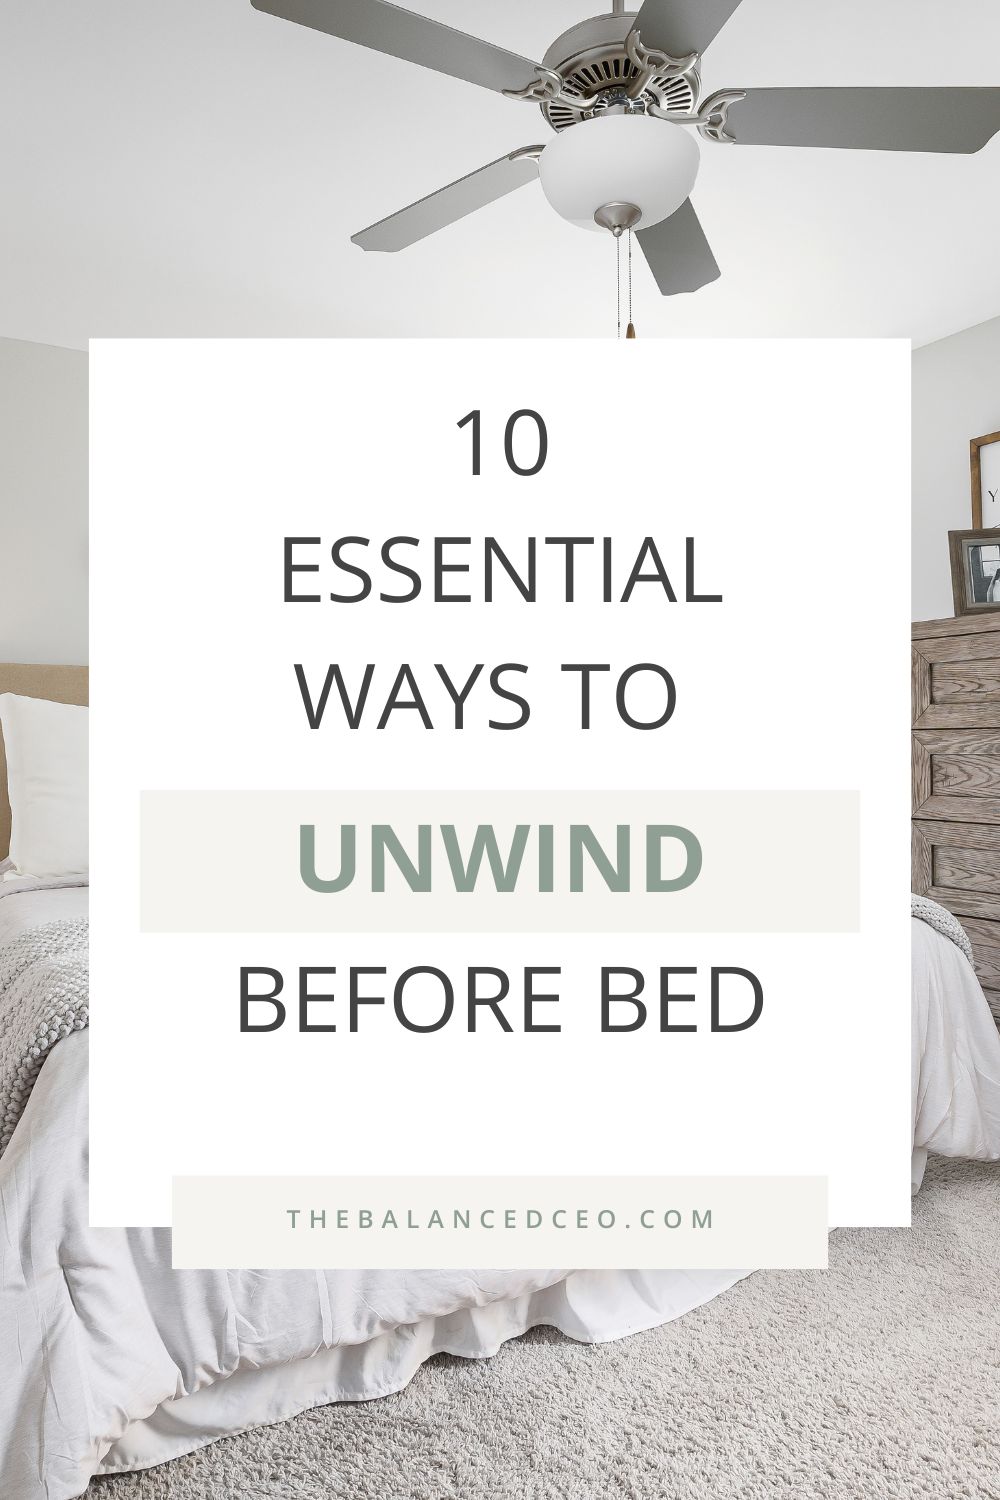 Rest Easy: 10 Essential Ways to Unwind Before Bed